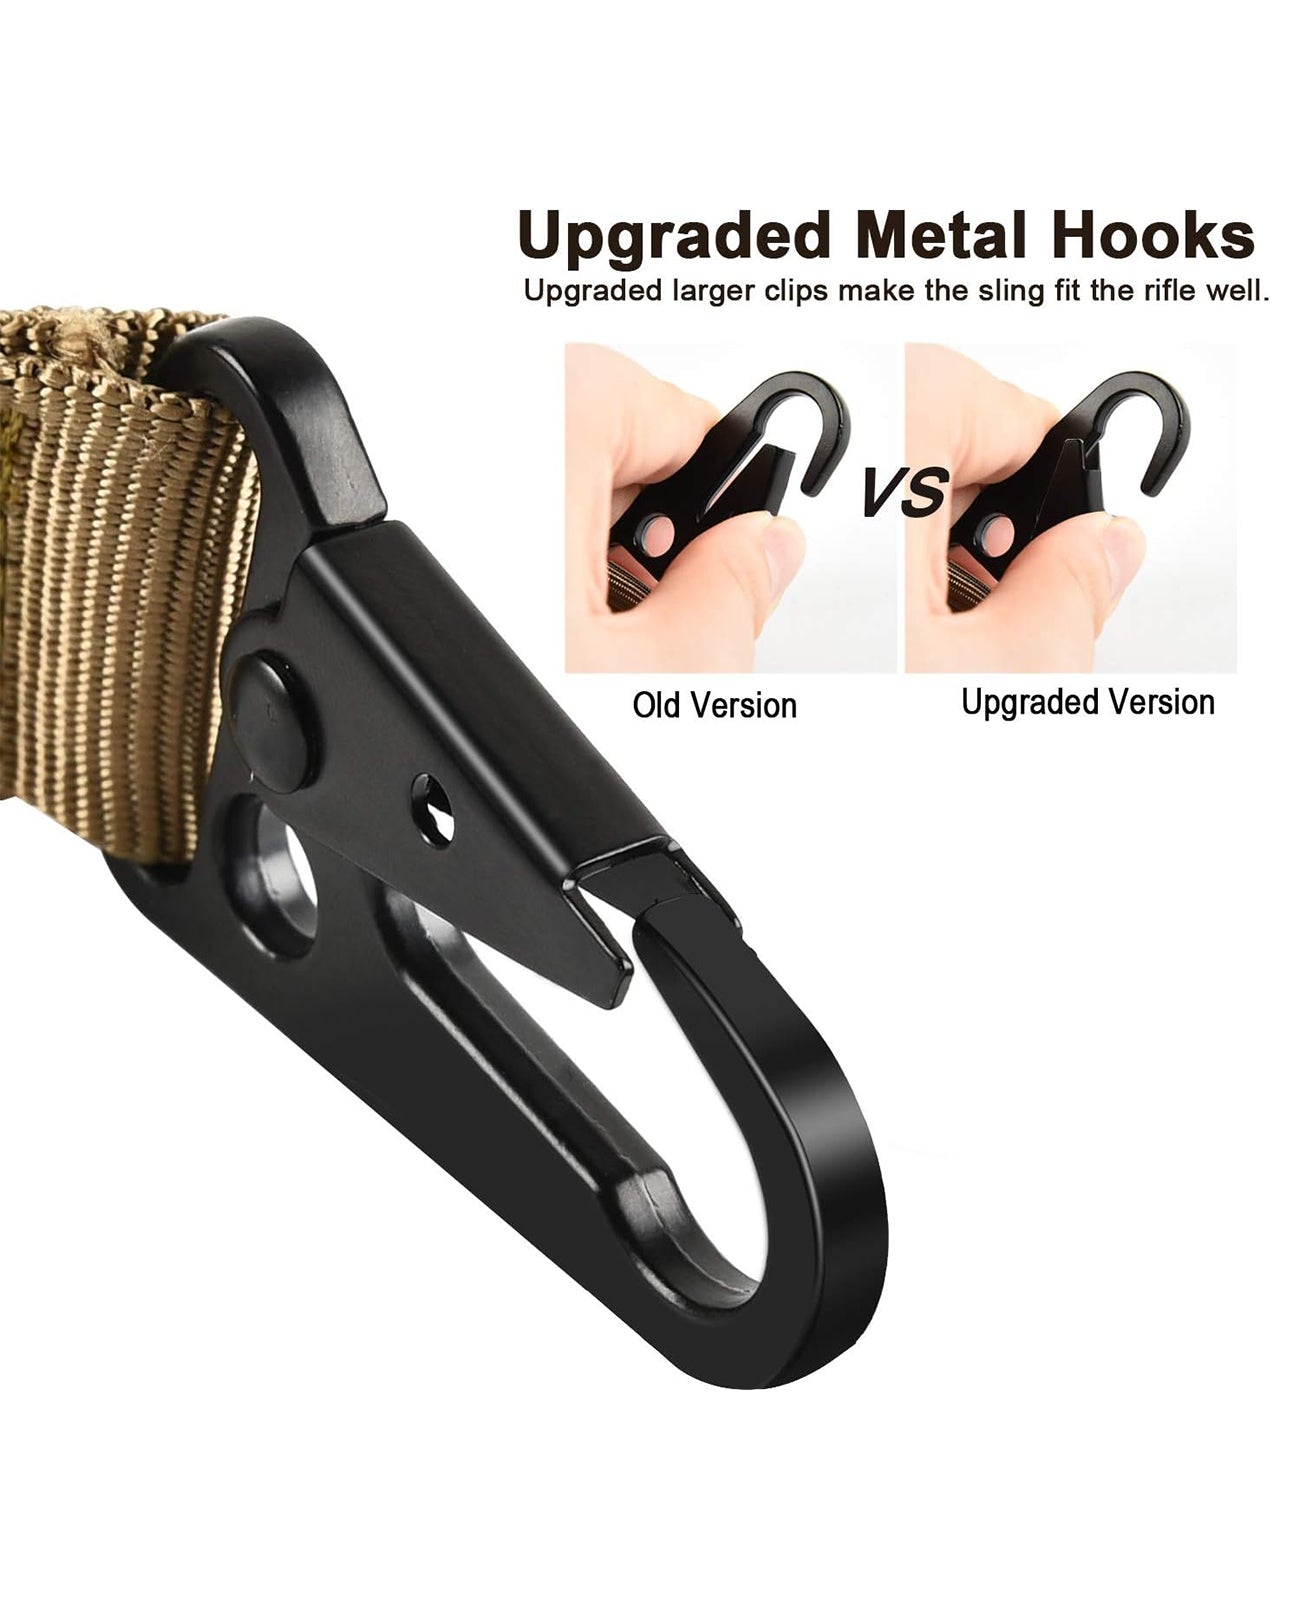 2 Point Rifle Sling with Upgraded Metal Hooks